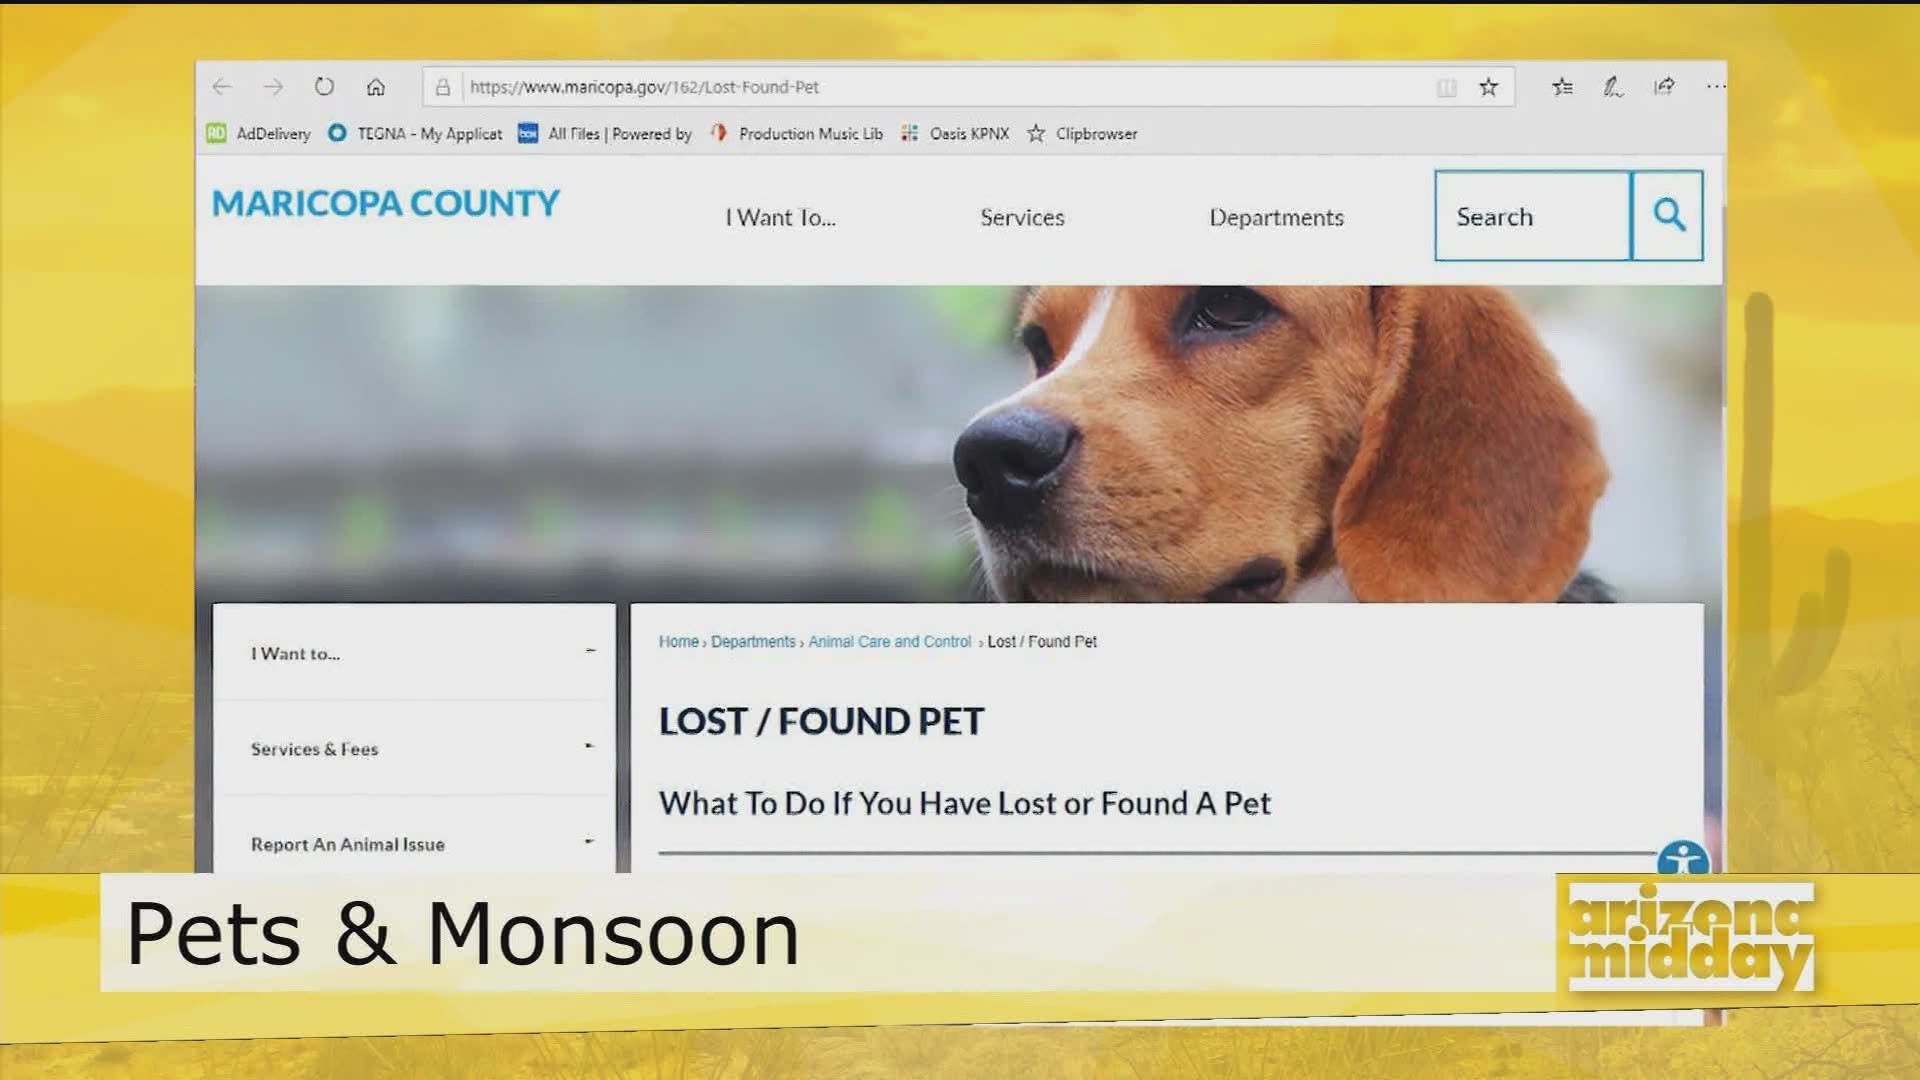 John Reynolds with Maricopa Animal Care & Control gives us his top tips to keep your pets safe during the storm and what to do if they are lost